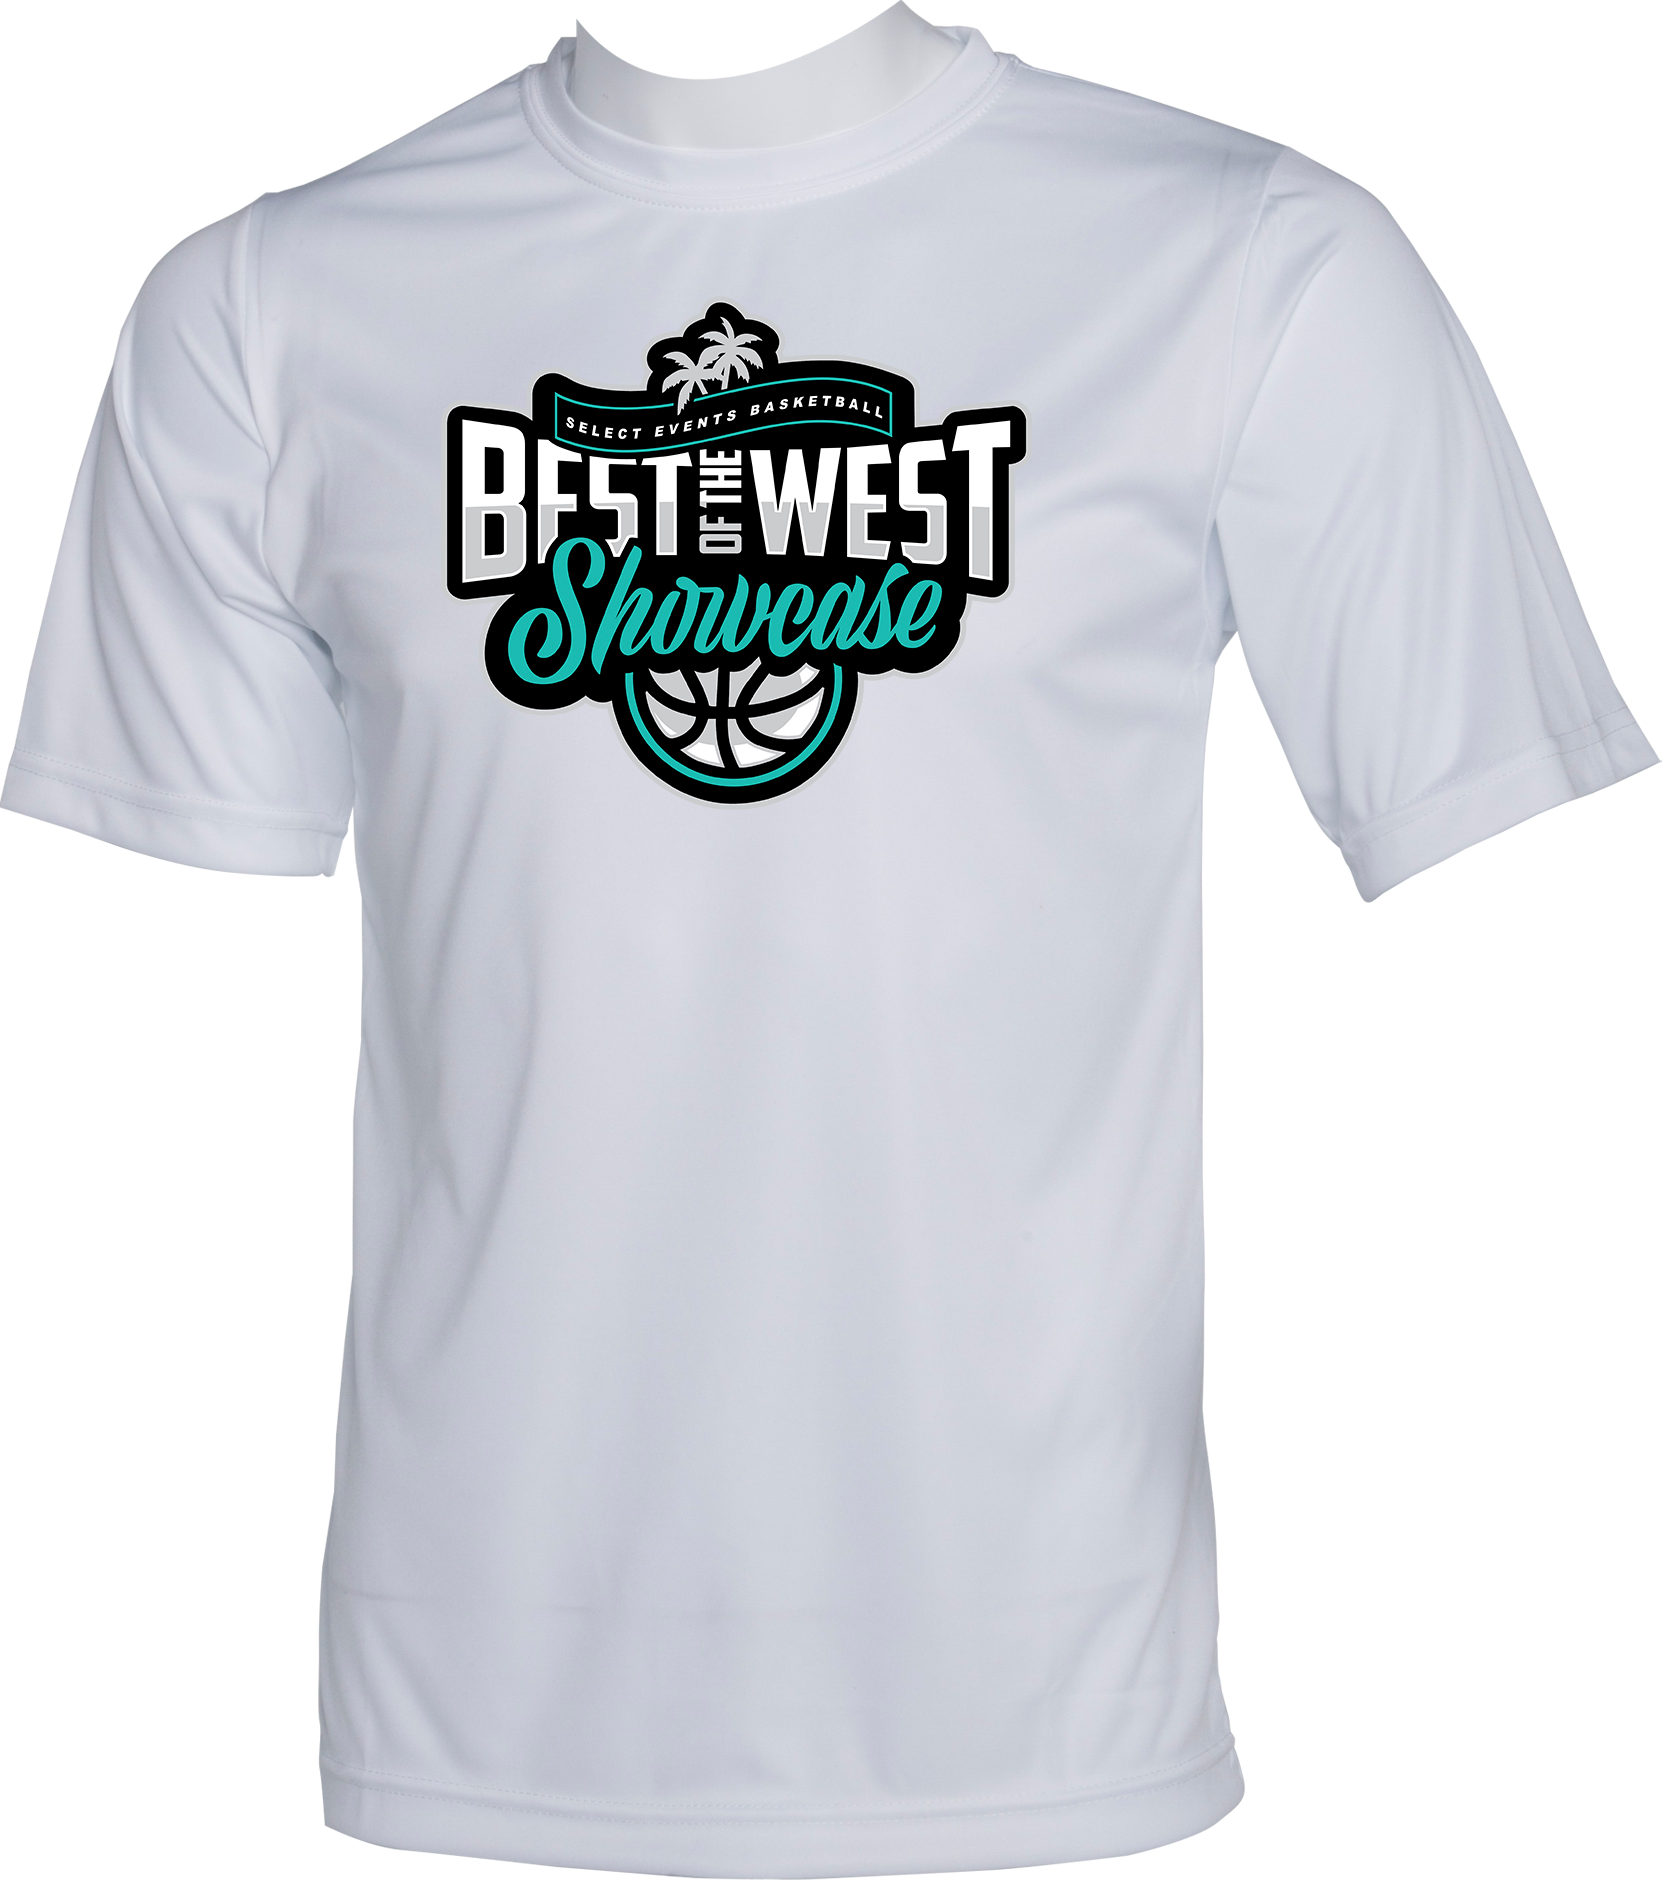 PERFORMANCE SHIRTS - 2023 Best Of The West Showcase